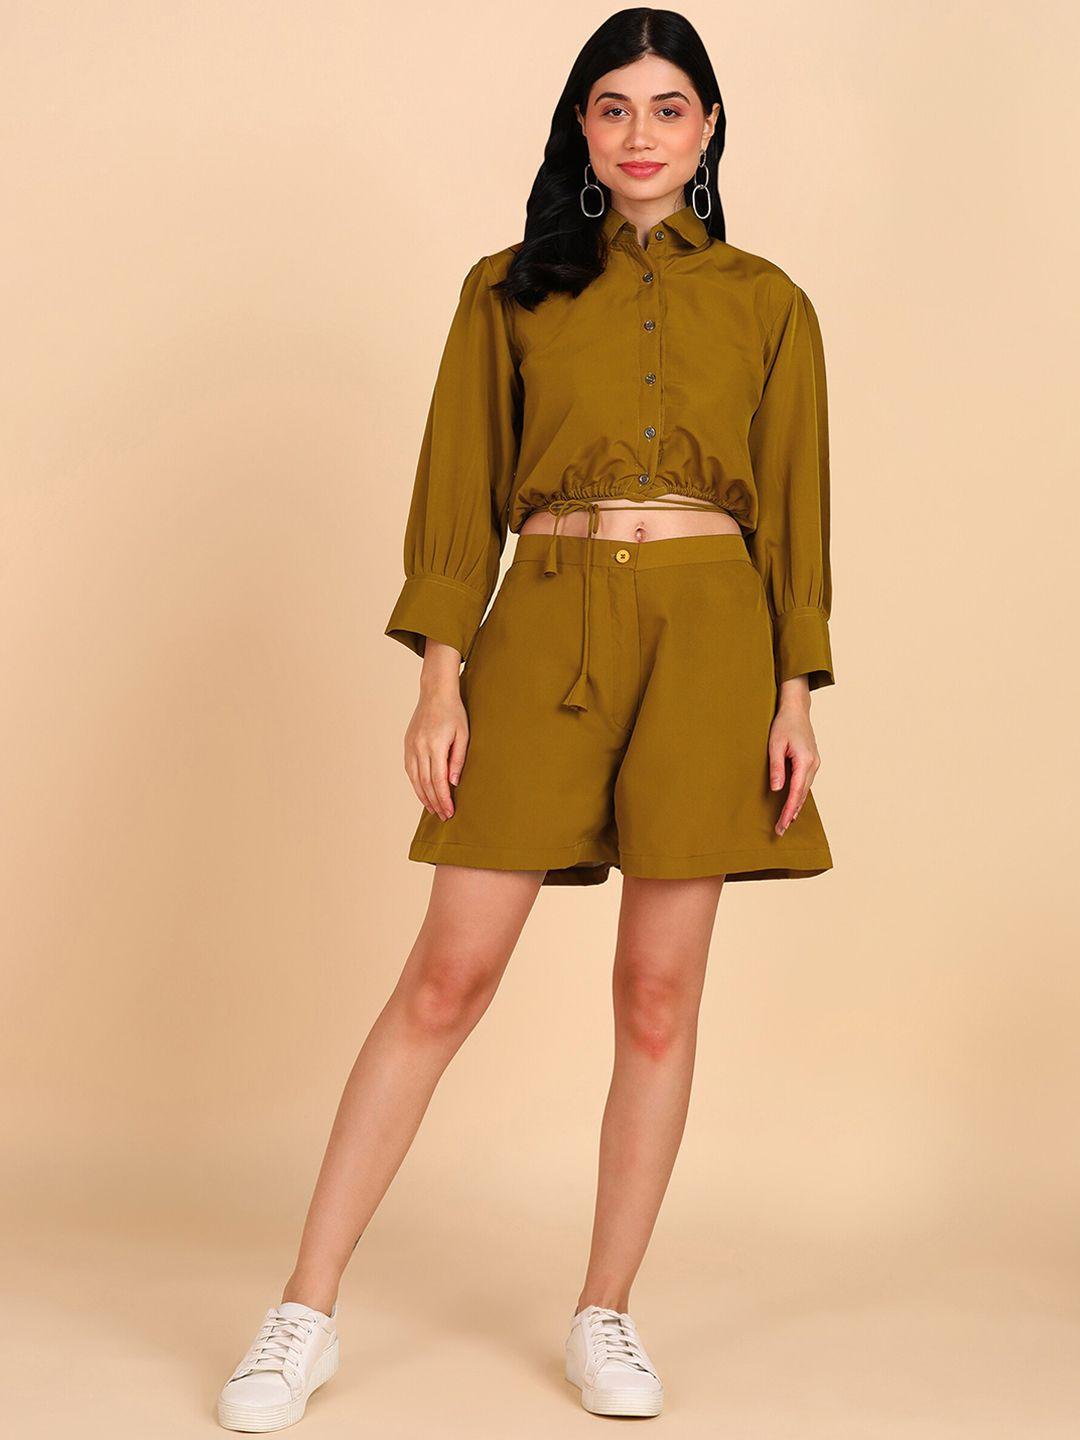 baesd shirt collar cuffed sleeves crop top with shorts